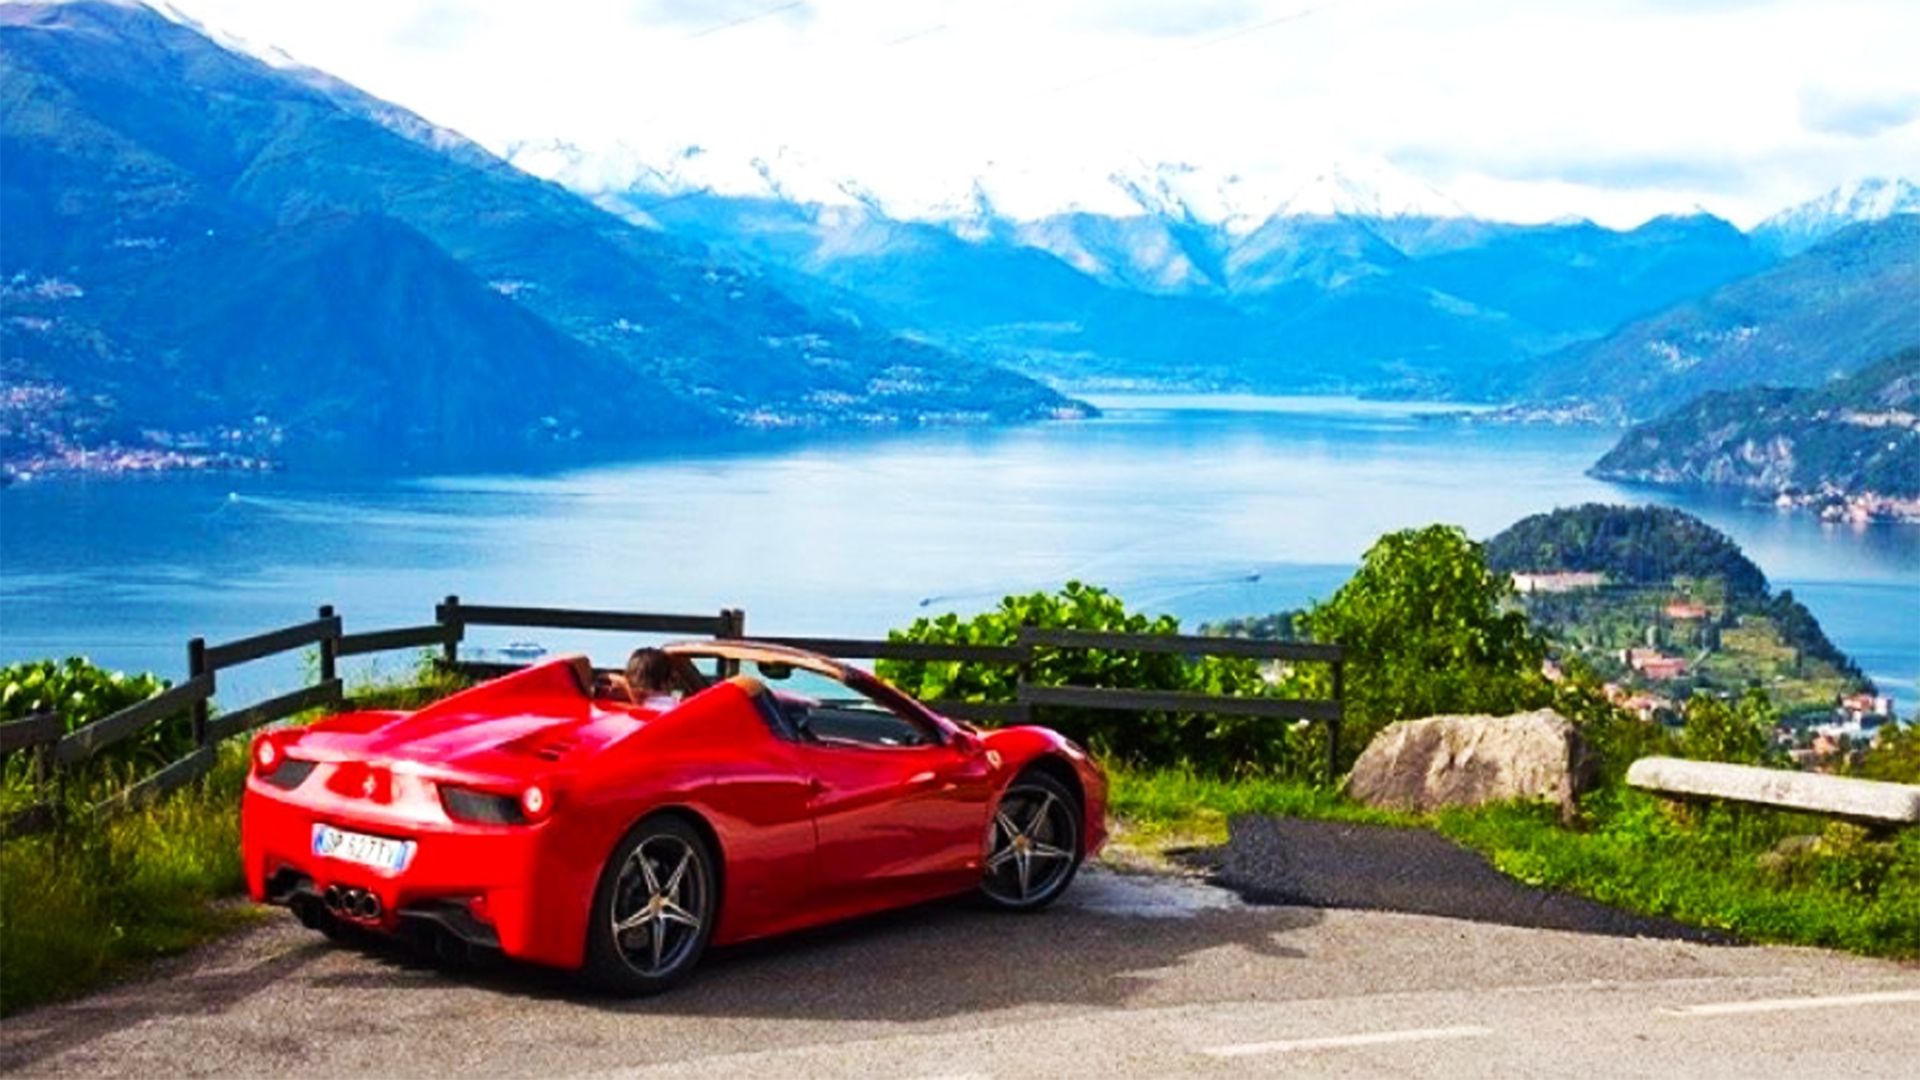 Discover Italy on a supercar: from the shores of Lake Maggiore to